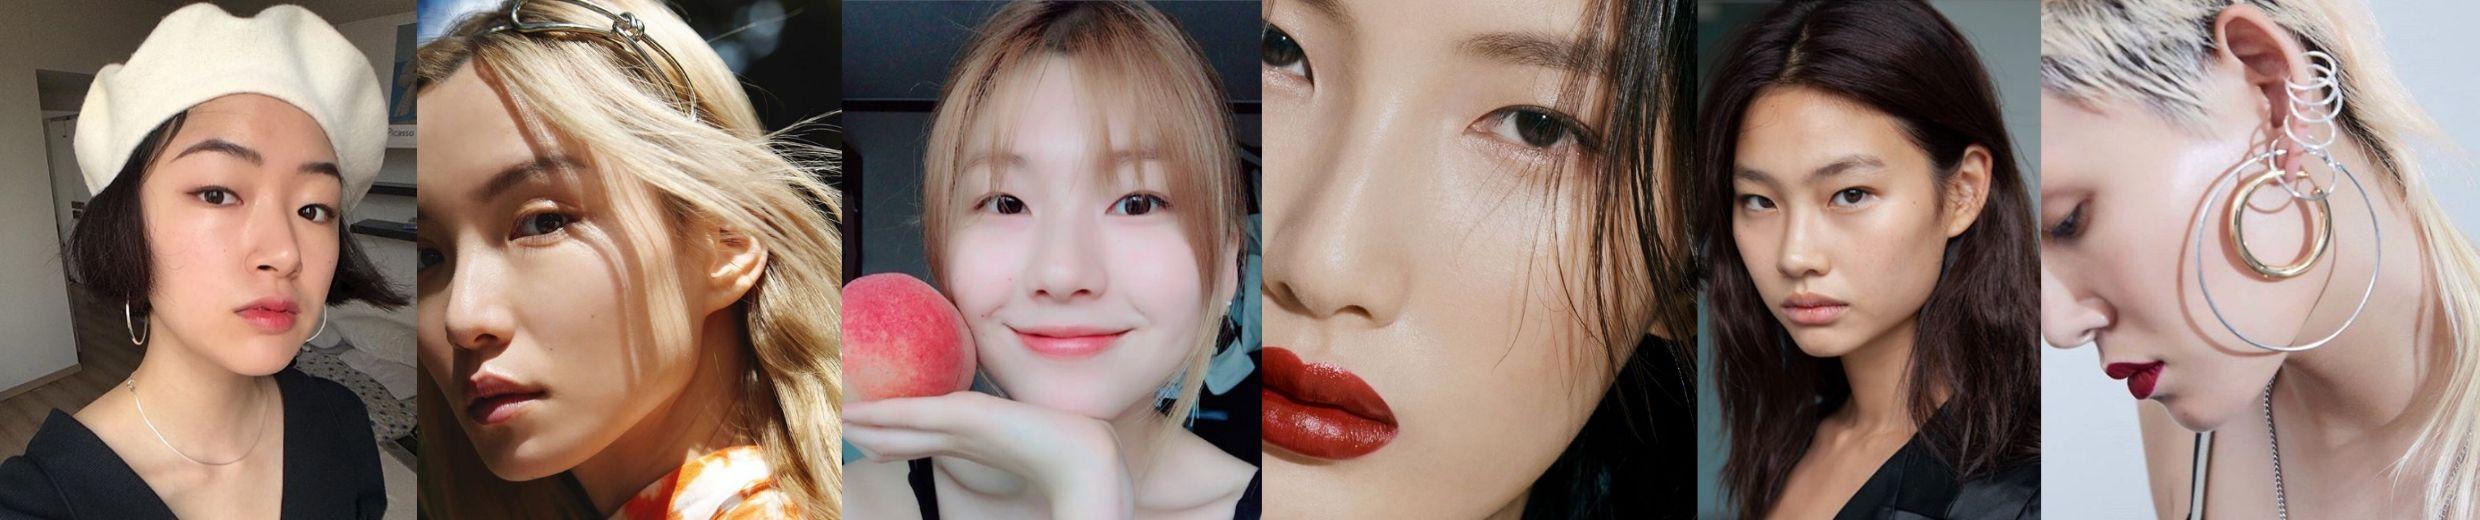 6 Korean Models Share Their Top Skincare Secrets Learned from Their Mothers